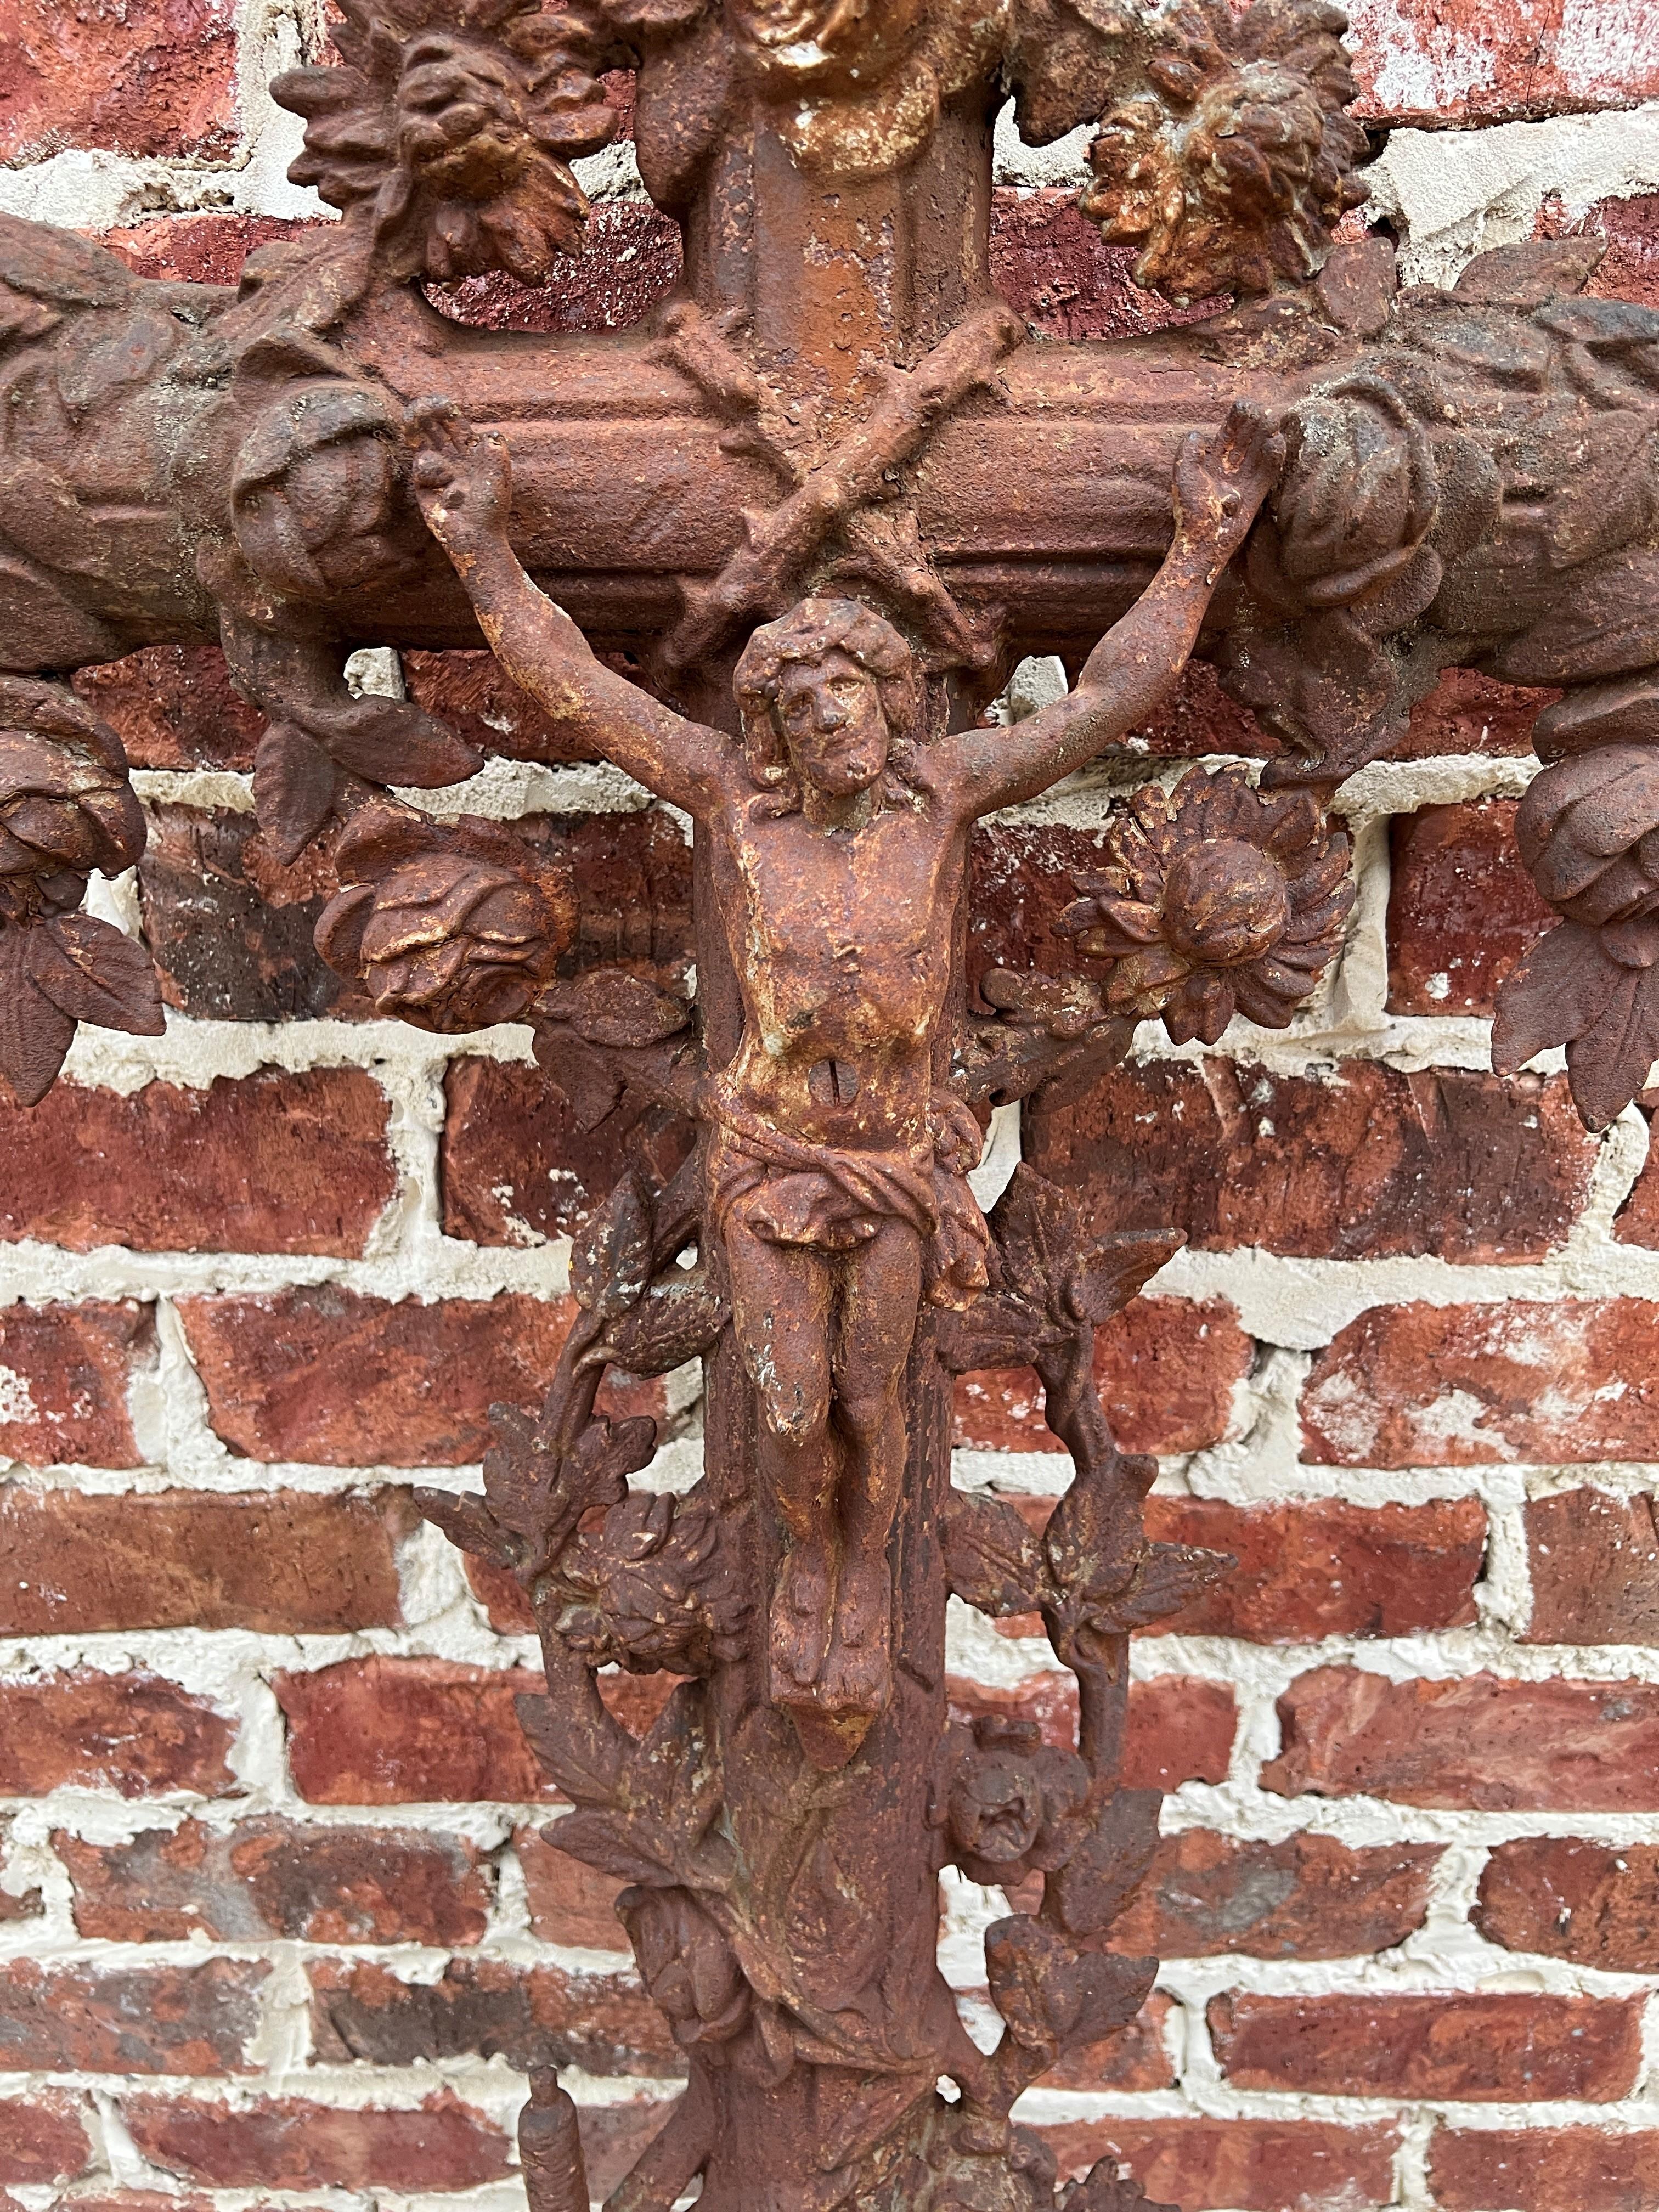 TALL Antique French Cast Iron Cross Crucifix~~Chapel Church Garden Architectural Yard Cemetery Prayer Room Wall Hanging~~c. 1890s

Fabulous details throughout~~original aged patina

 The perfect accent piece for any home or prayer room or as a